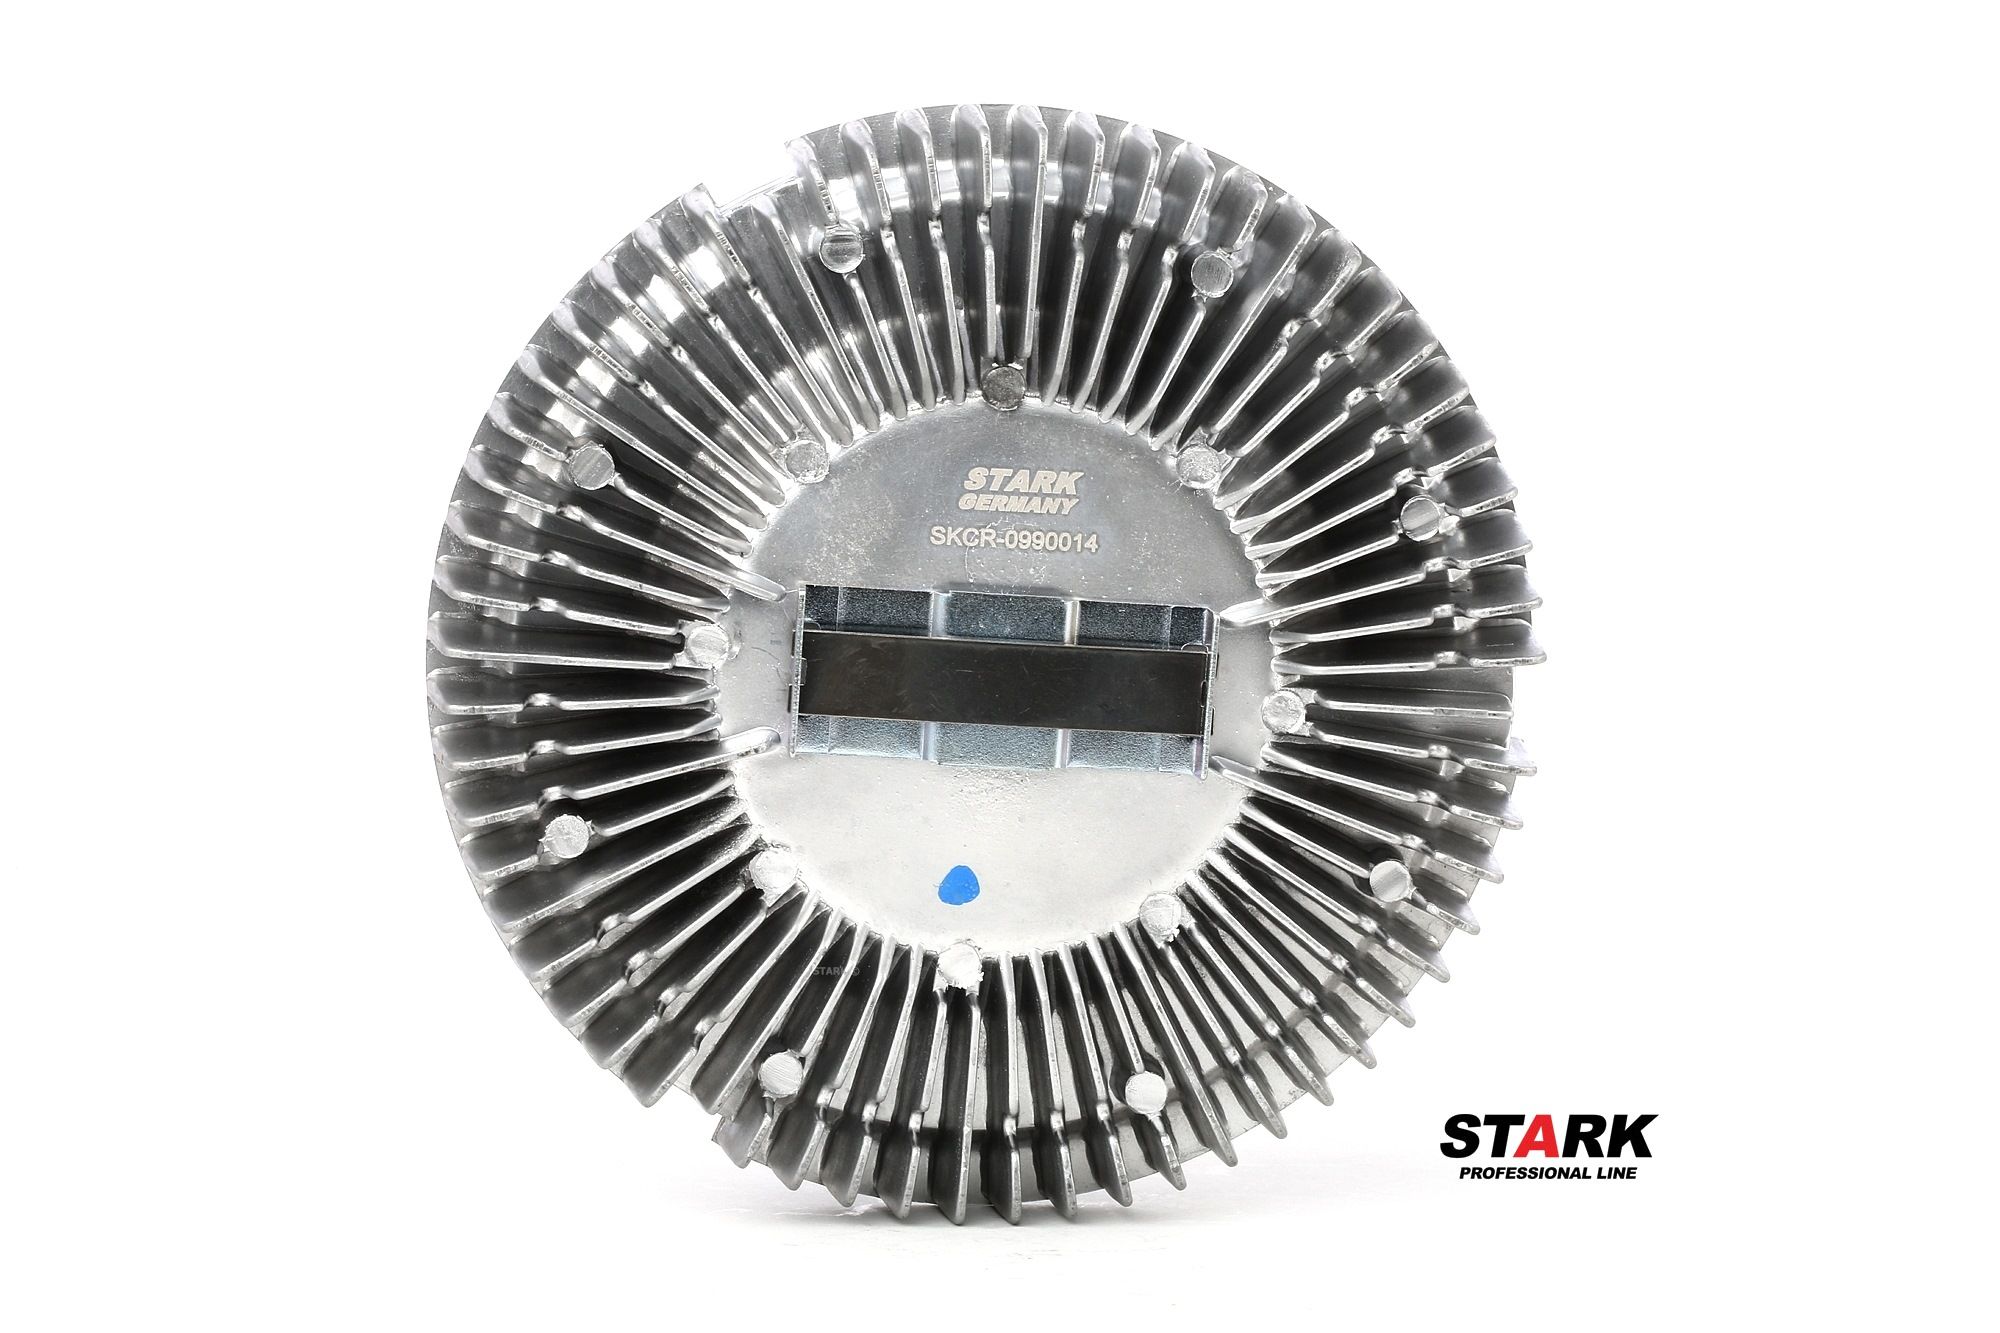 STARK SKCR-0990014 Fan clutch LAND ROVER experience and price